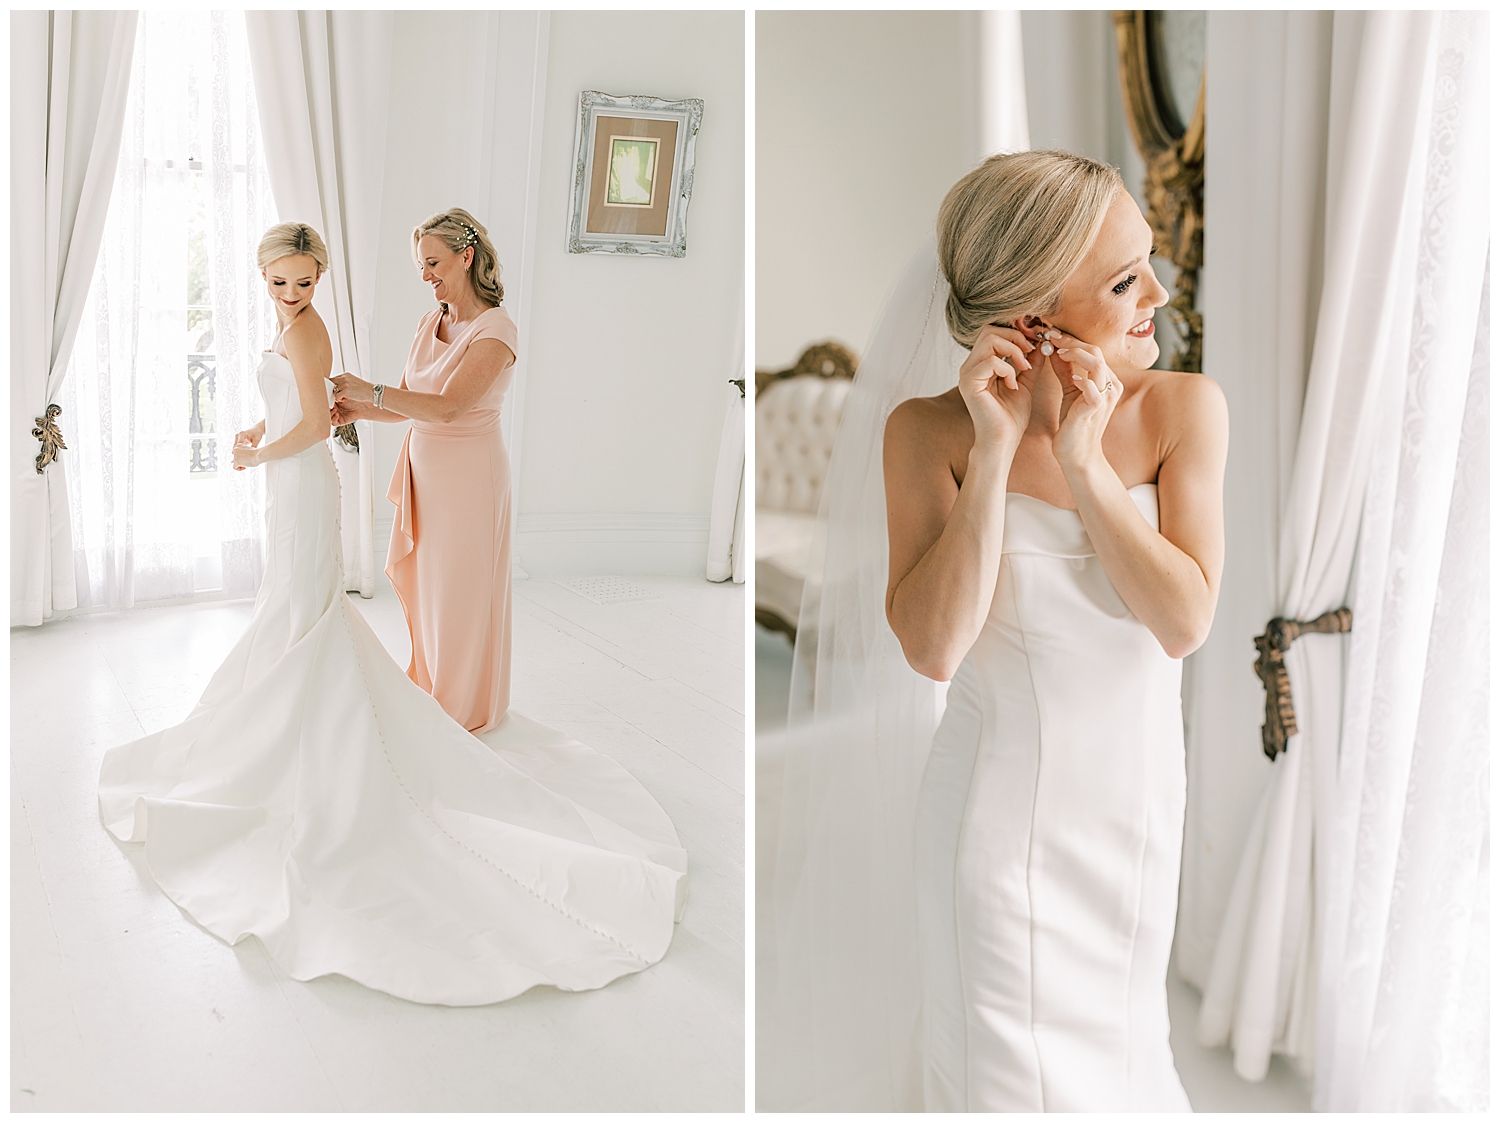 A bride gets ready in a white room.